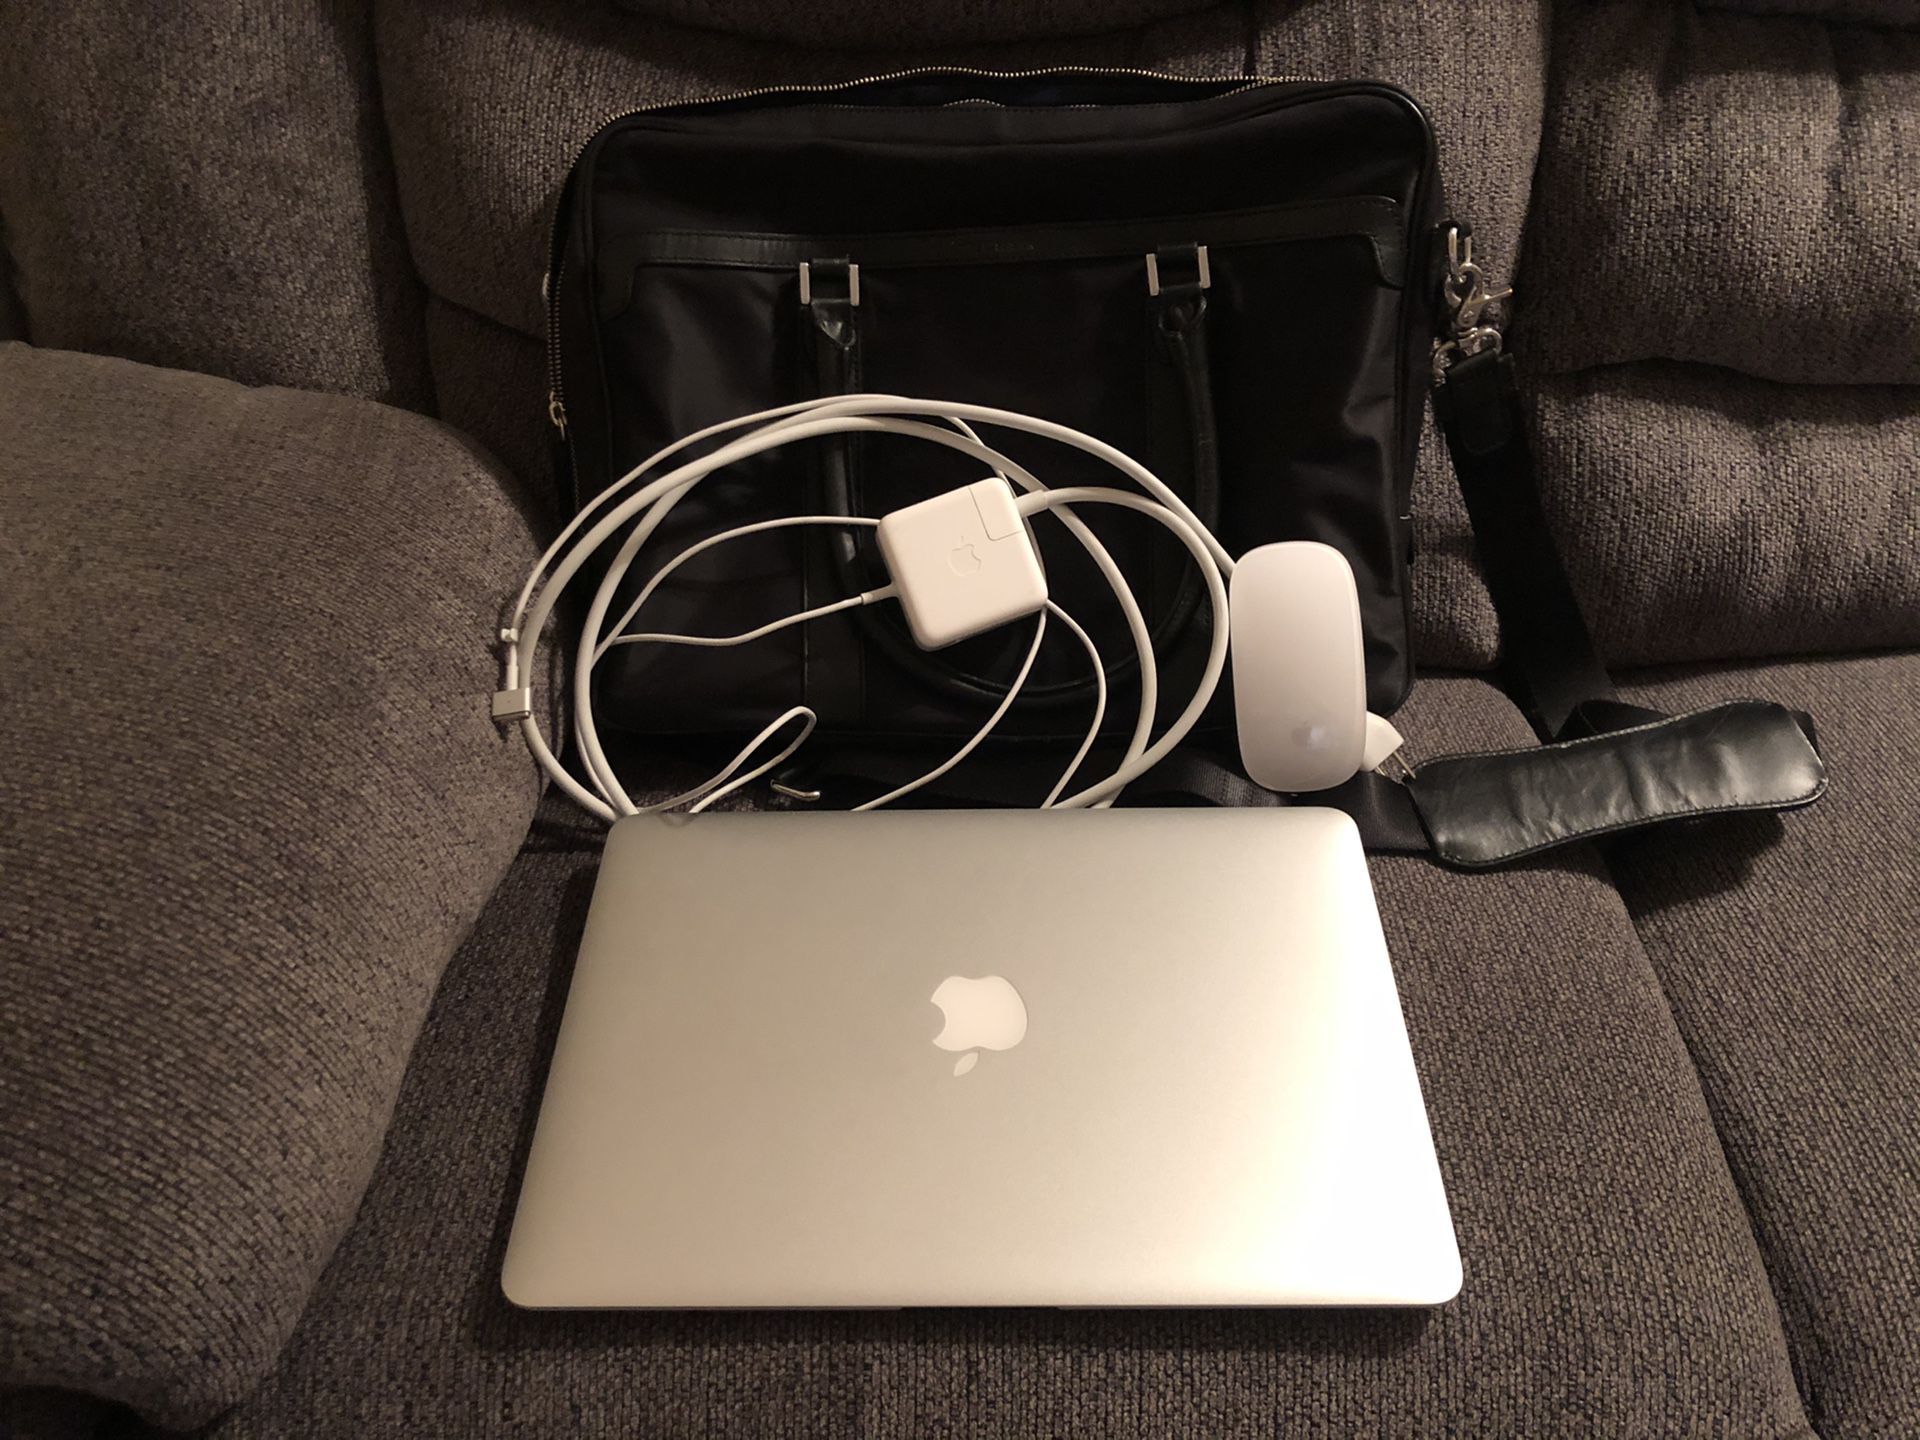 Mac Book Air With Bag and Mouse